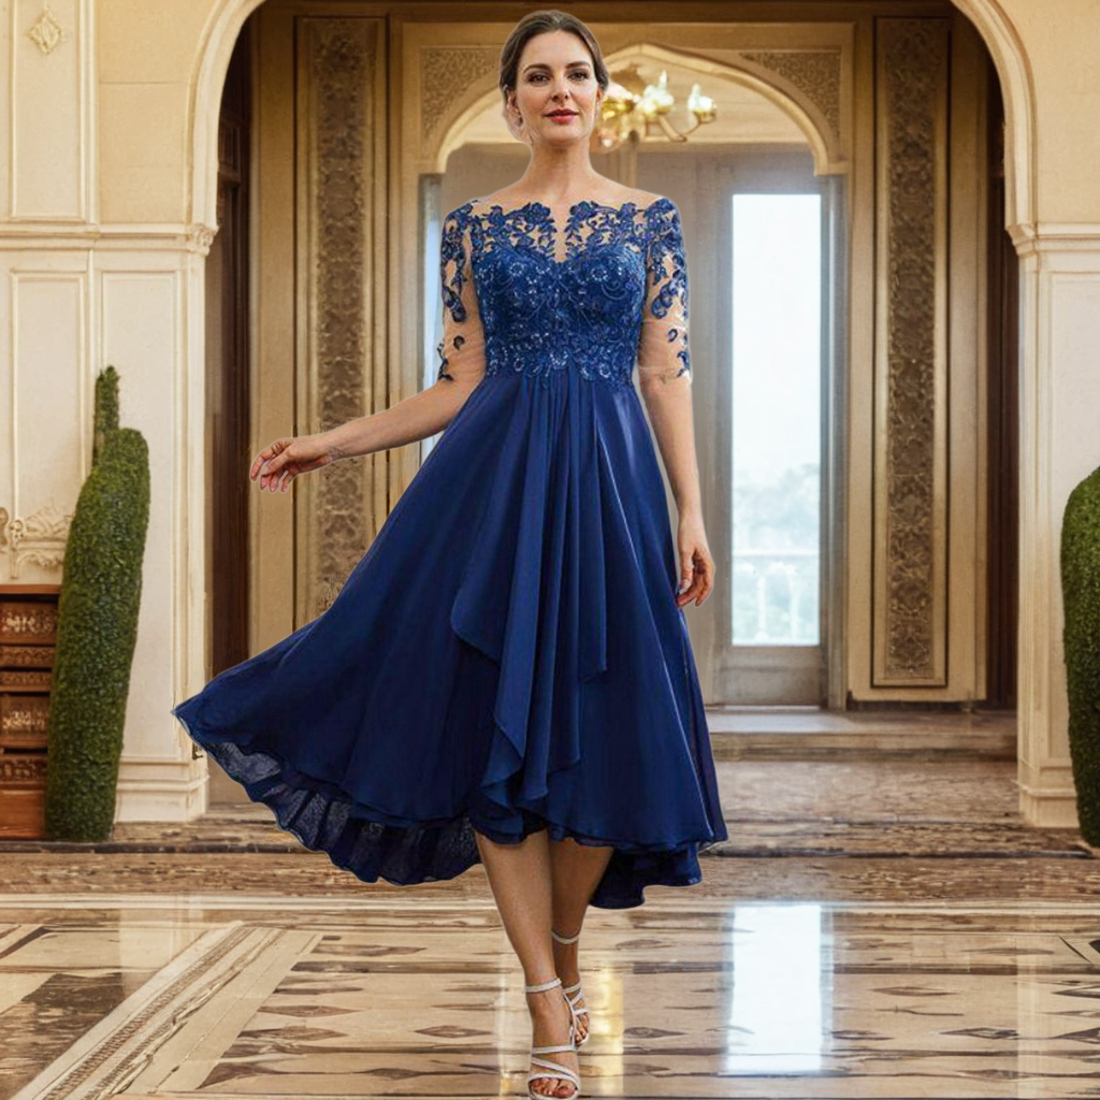 Short Royal Blue Mother Of The Bride Gowns Sheer Neck Half Sleeves Mother's Dresses Beaded Sequins Lace Mum Gowns For Women Wedding Guest Outfit AMM059